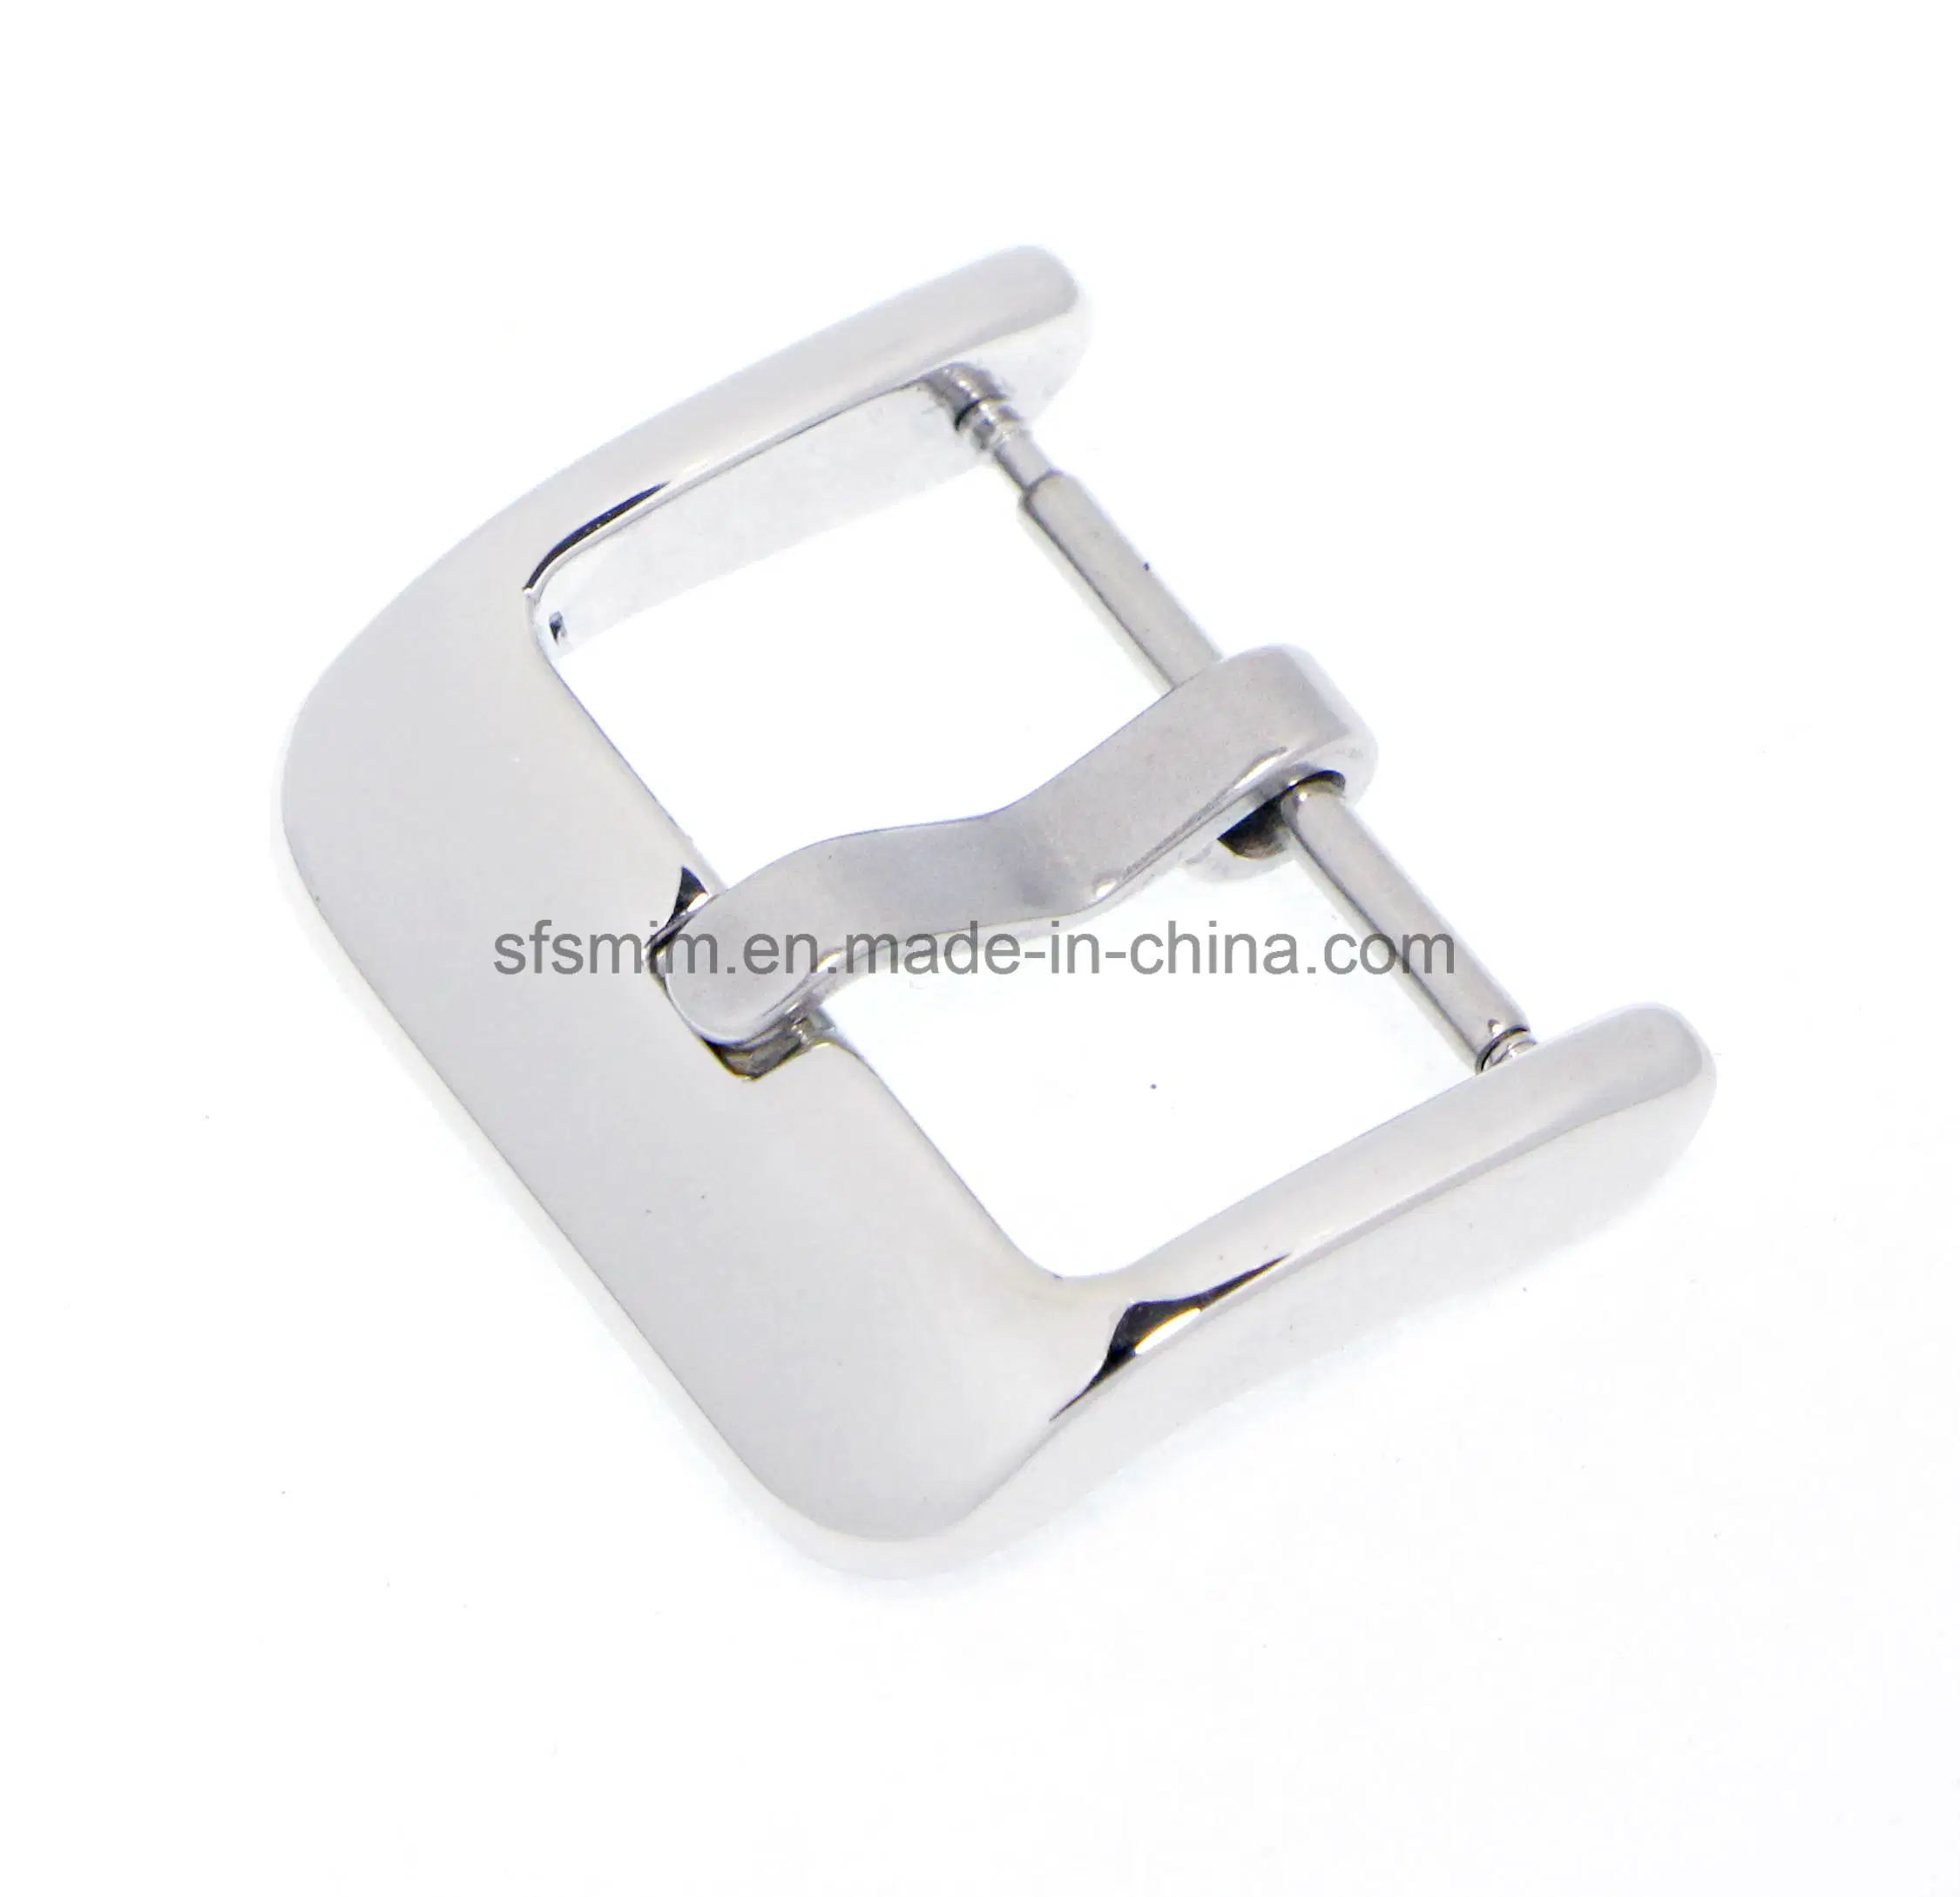 Polished Stainless Steel Watch Strap Pin Buckles Sfs-008s